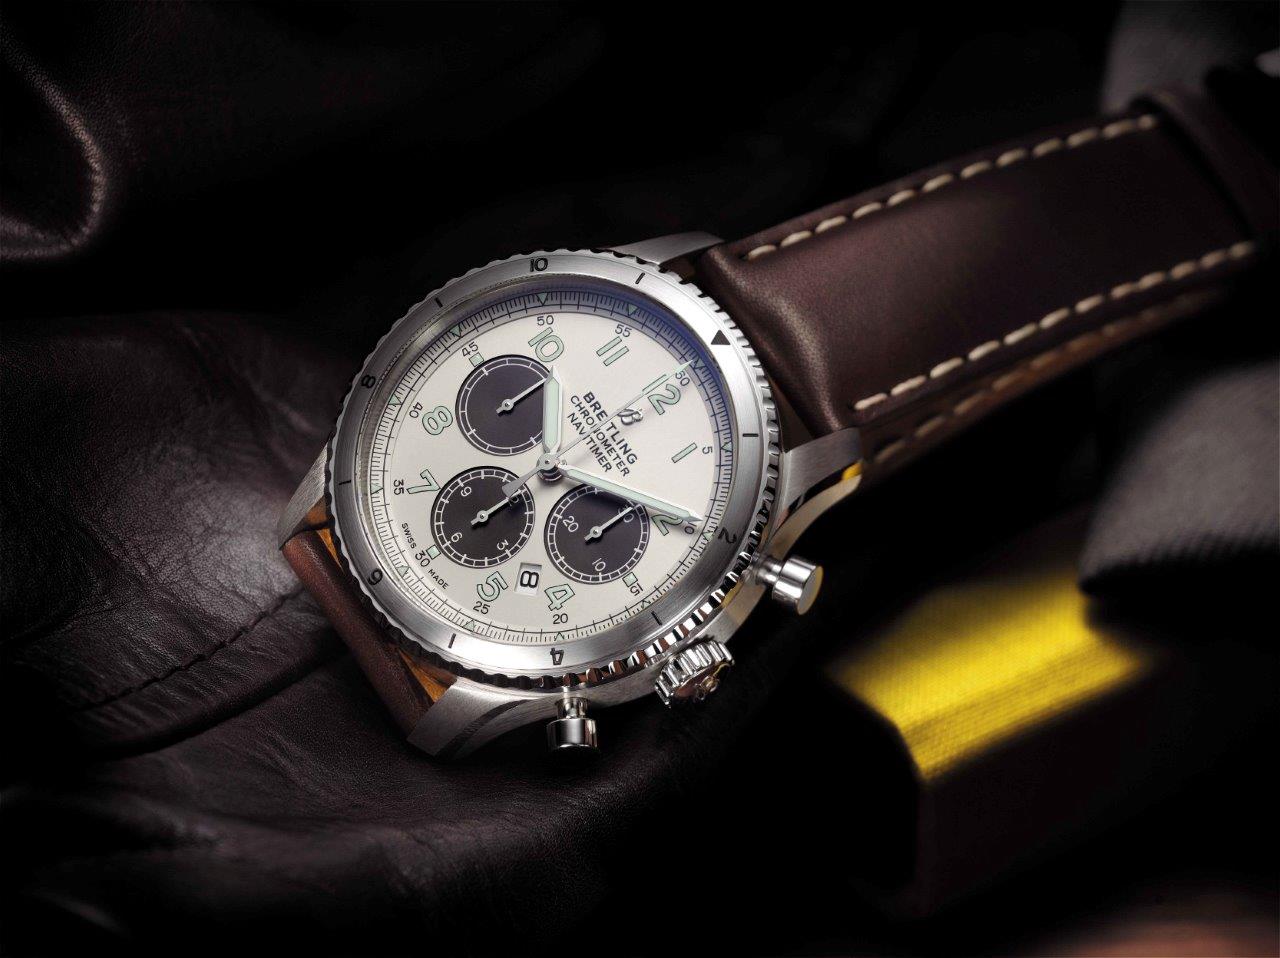 For the contrasting dial design and brown leather strap, this fake Breitling watch specially carries a vintage feeling.